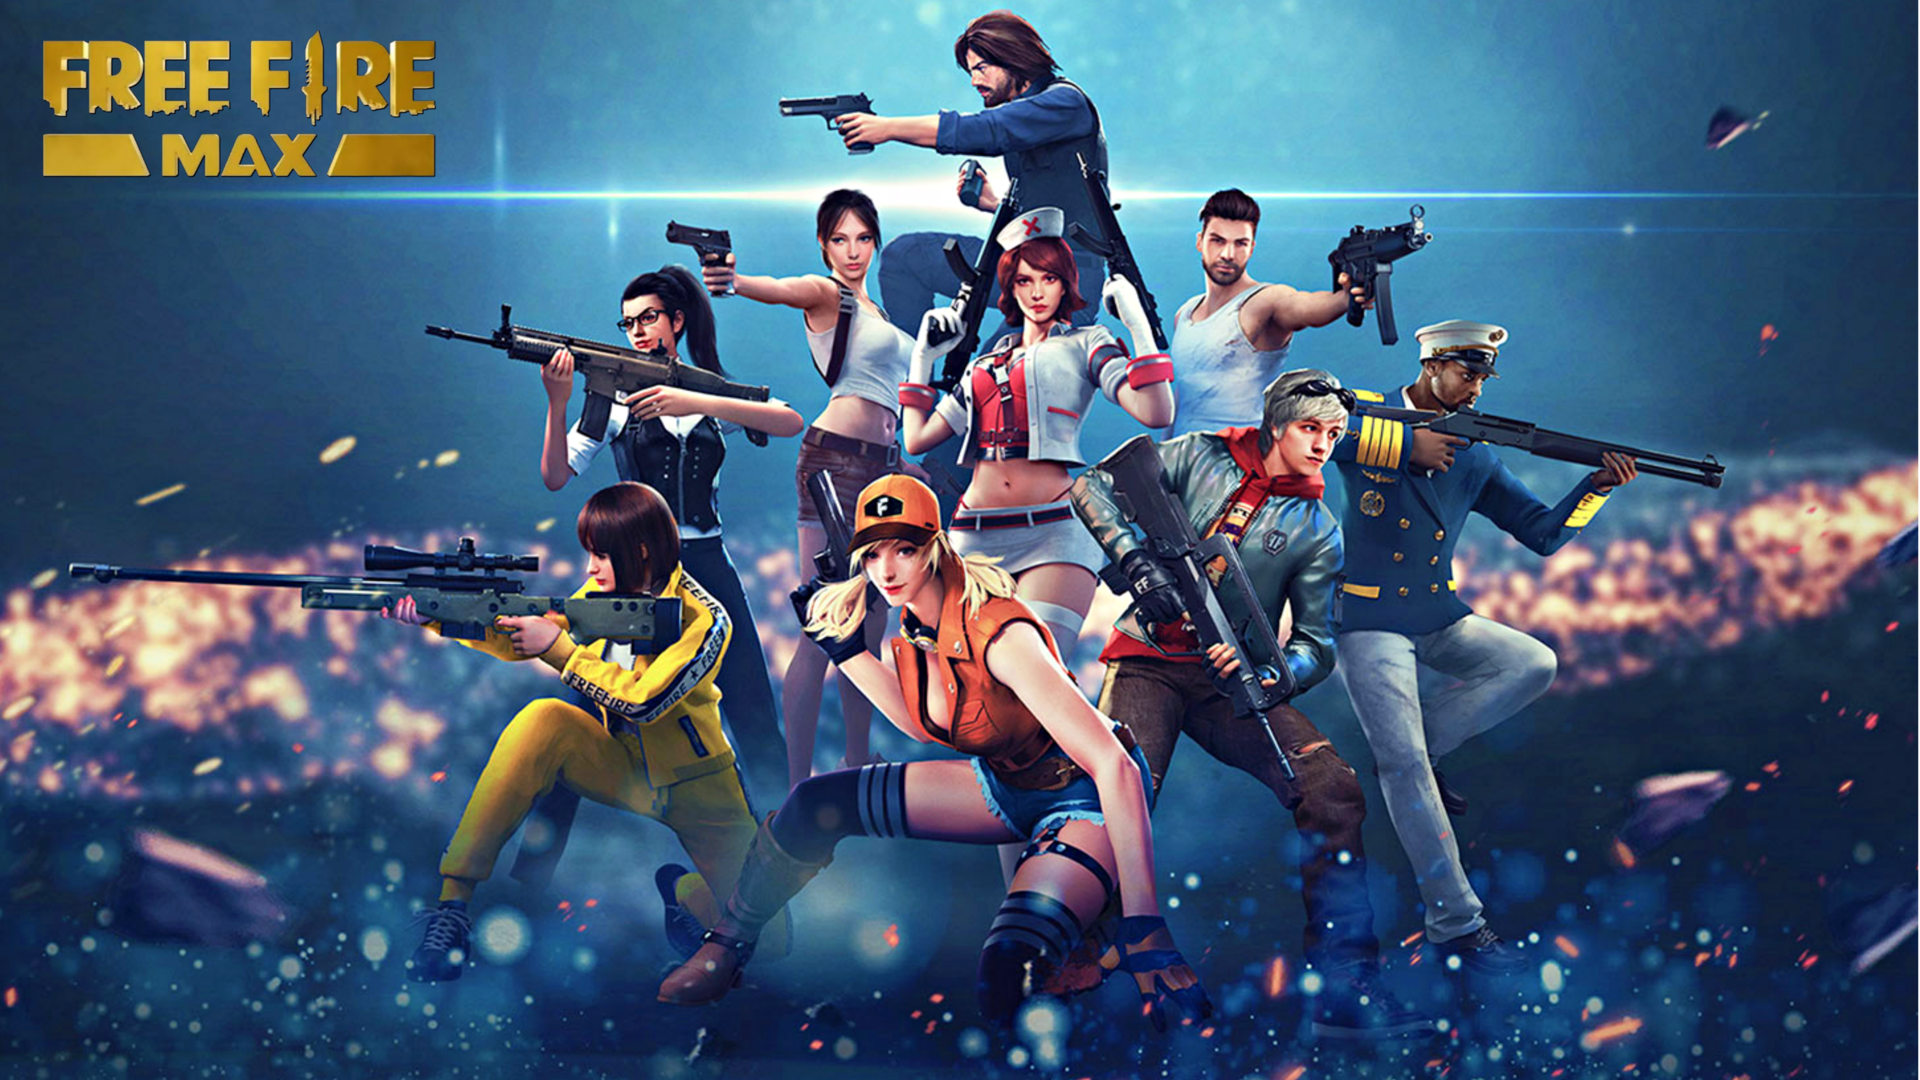 Free Fire MAX codes for March 7: How to redeem